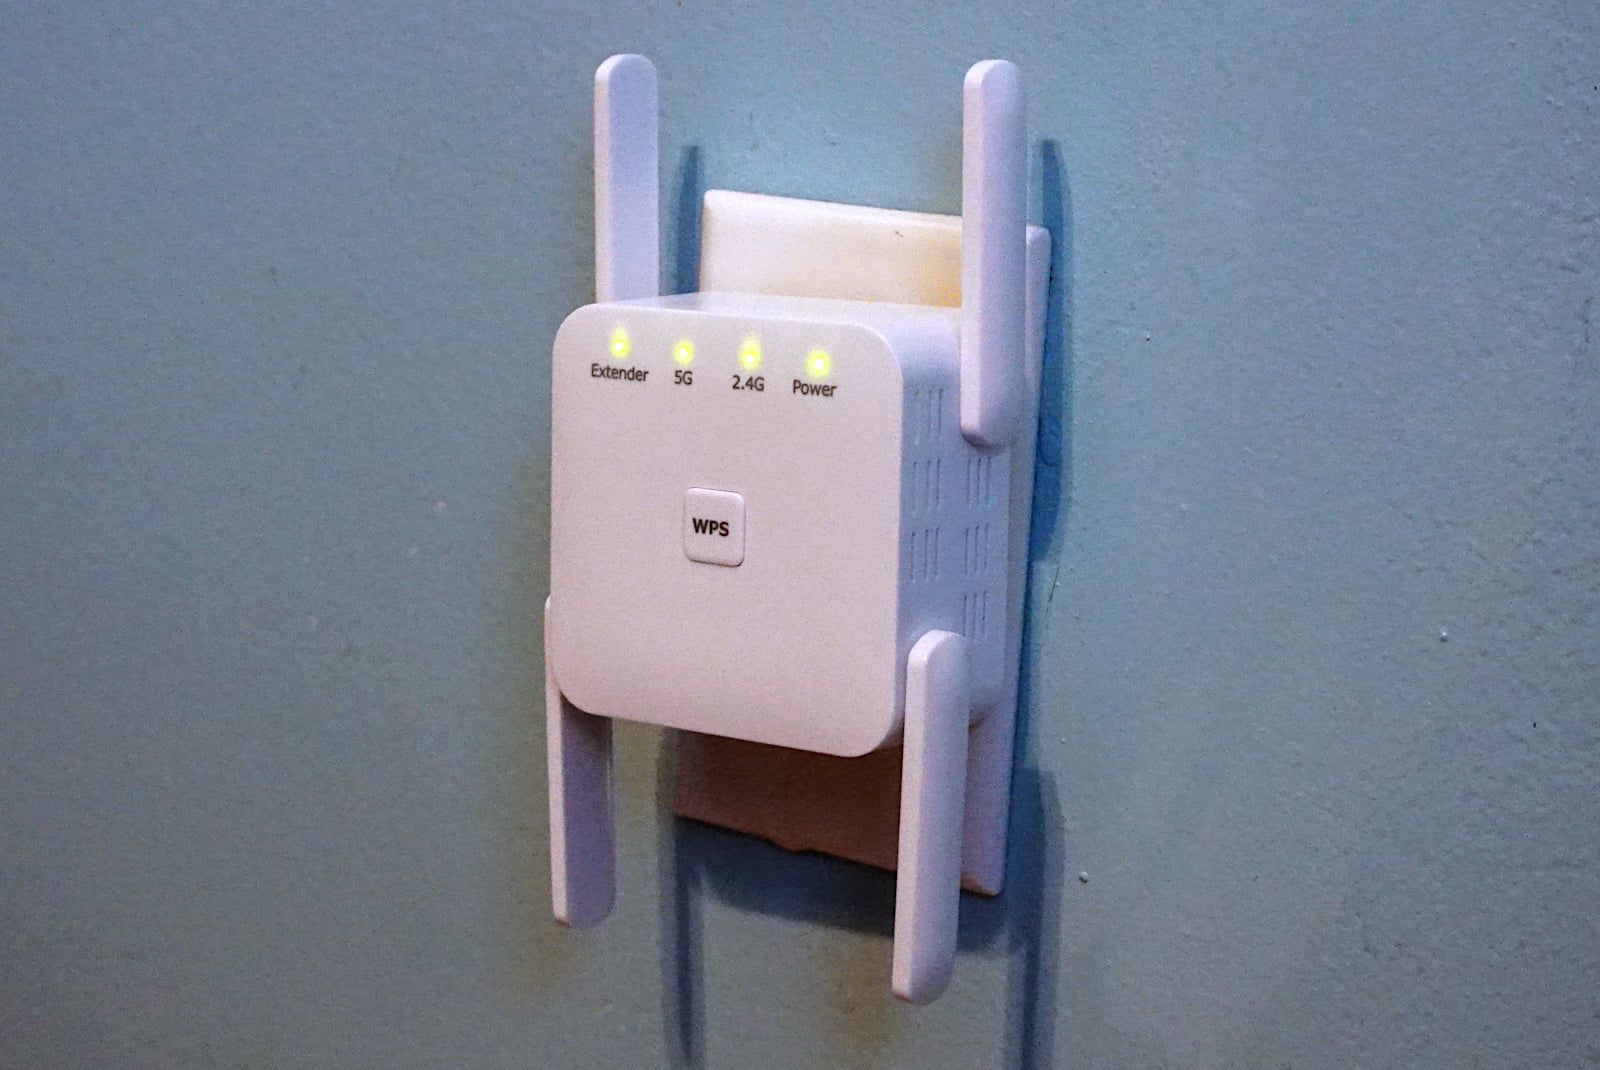 Encalife Wifi extender mounted to wall